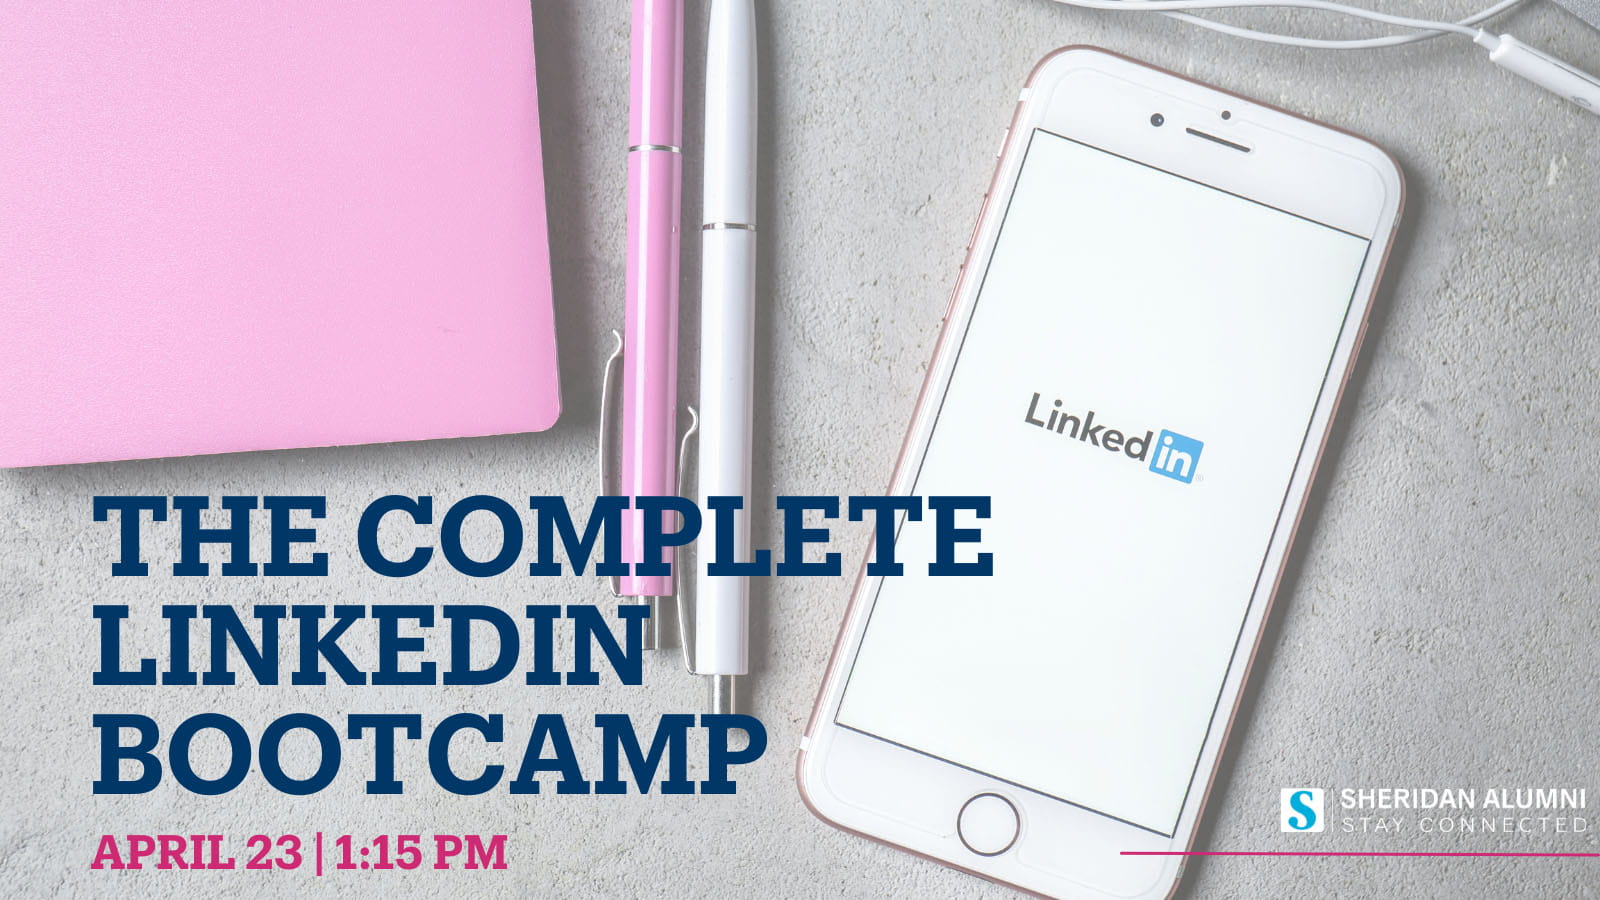 The Complete LinkedIn Bootcamp | April 23 | 1:15 p.m. | Sheridan Alumni | Stay Connected